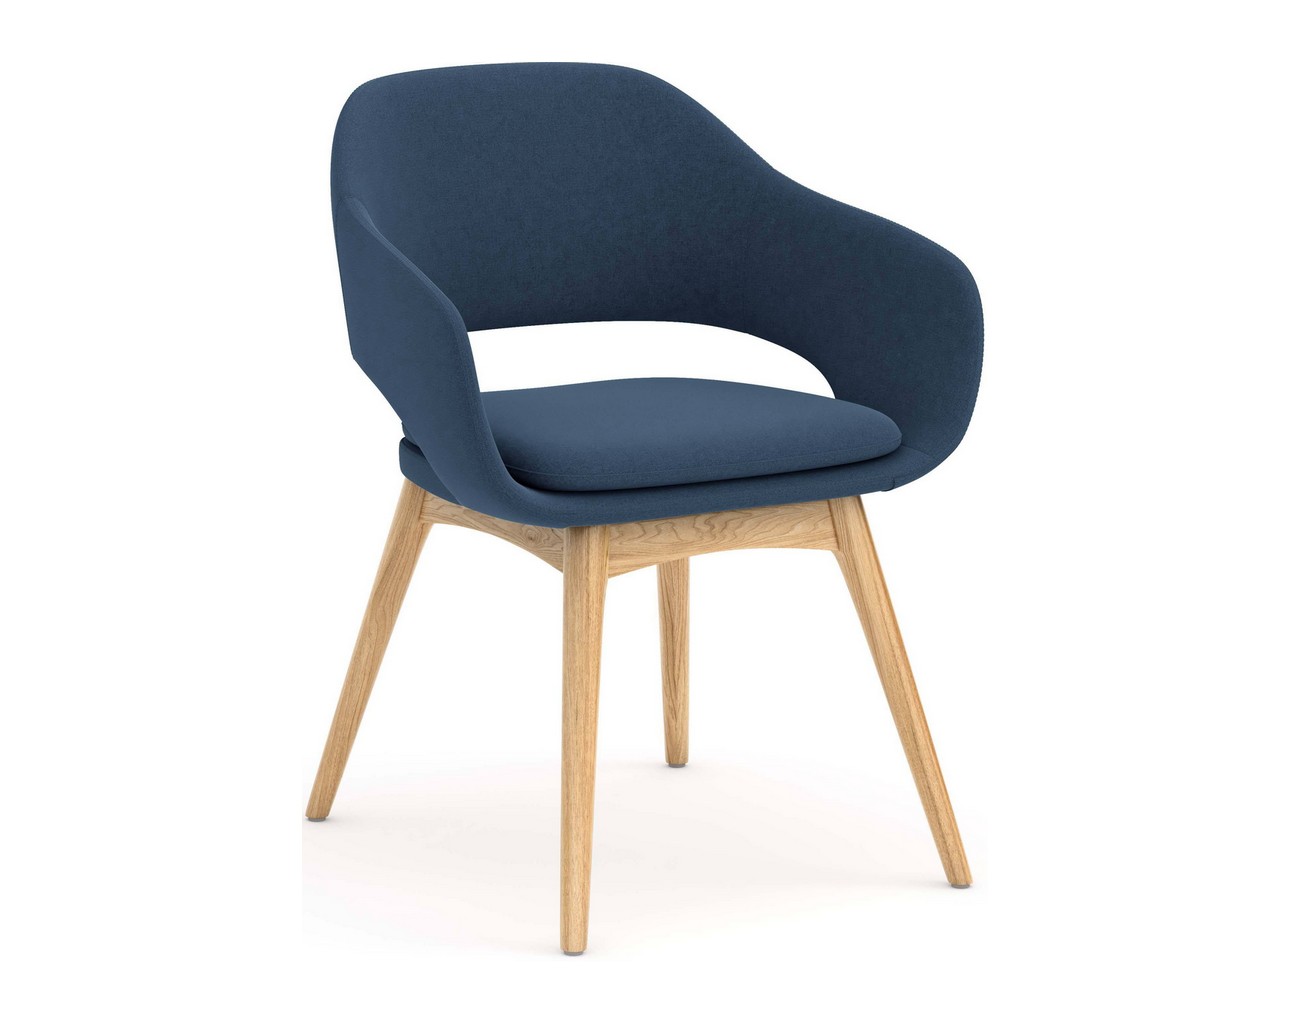 Kona Guest Chair with Natural Wood Base - Blue